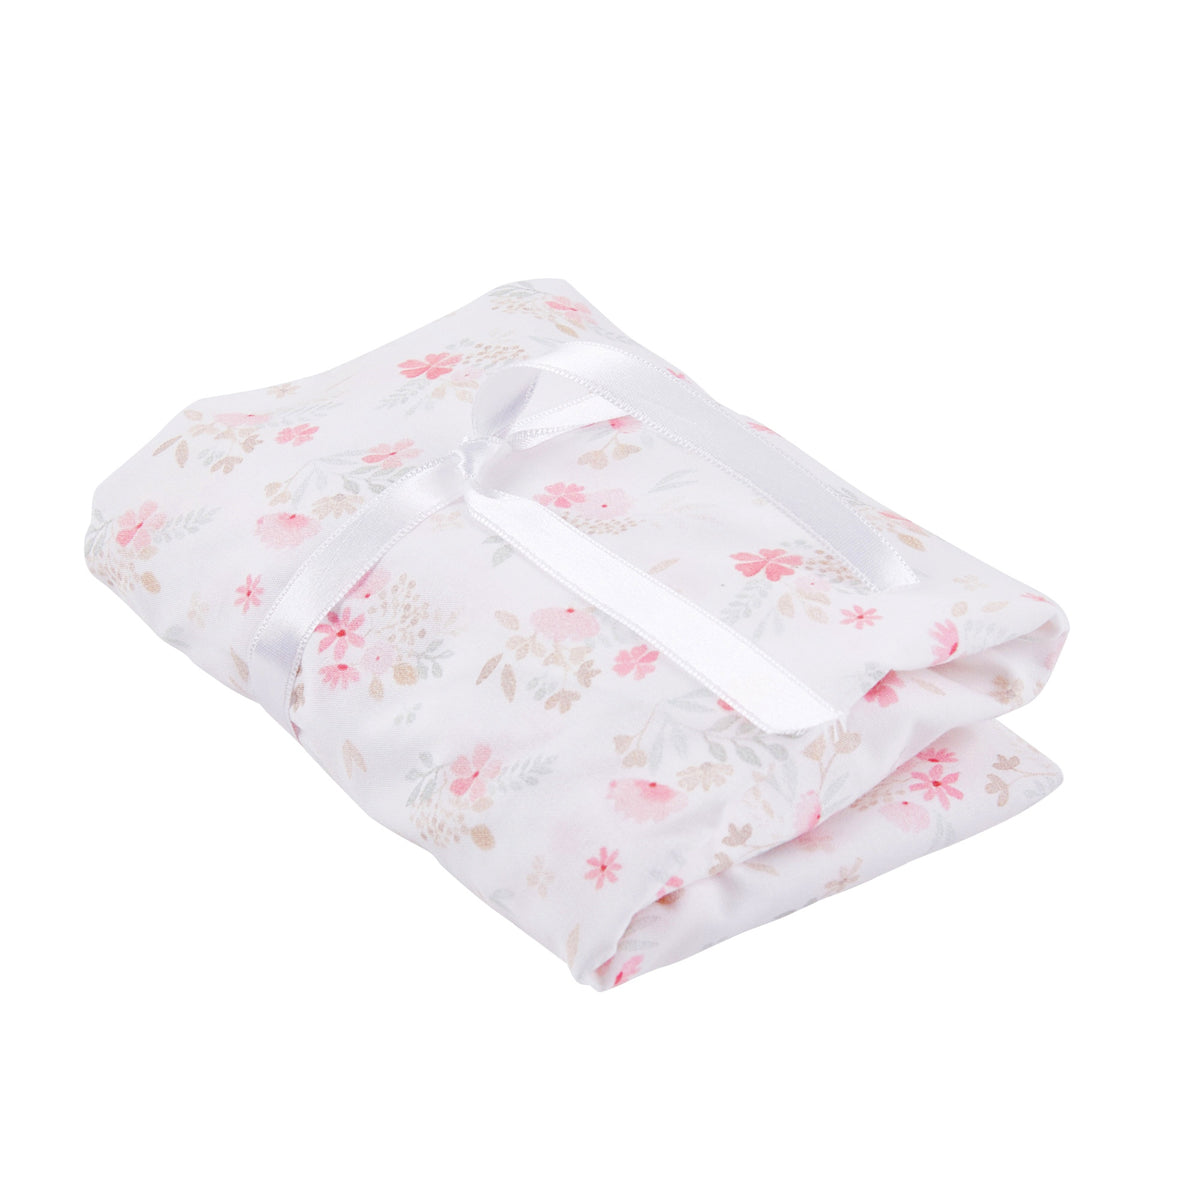 Theophile & Patachou Cradle Fitted Sheet - Pink Flower